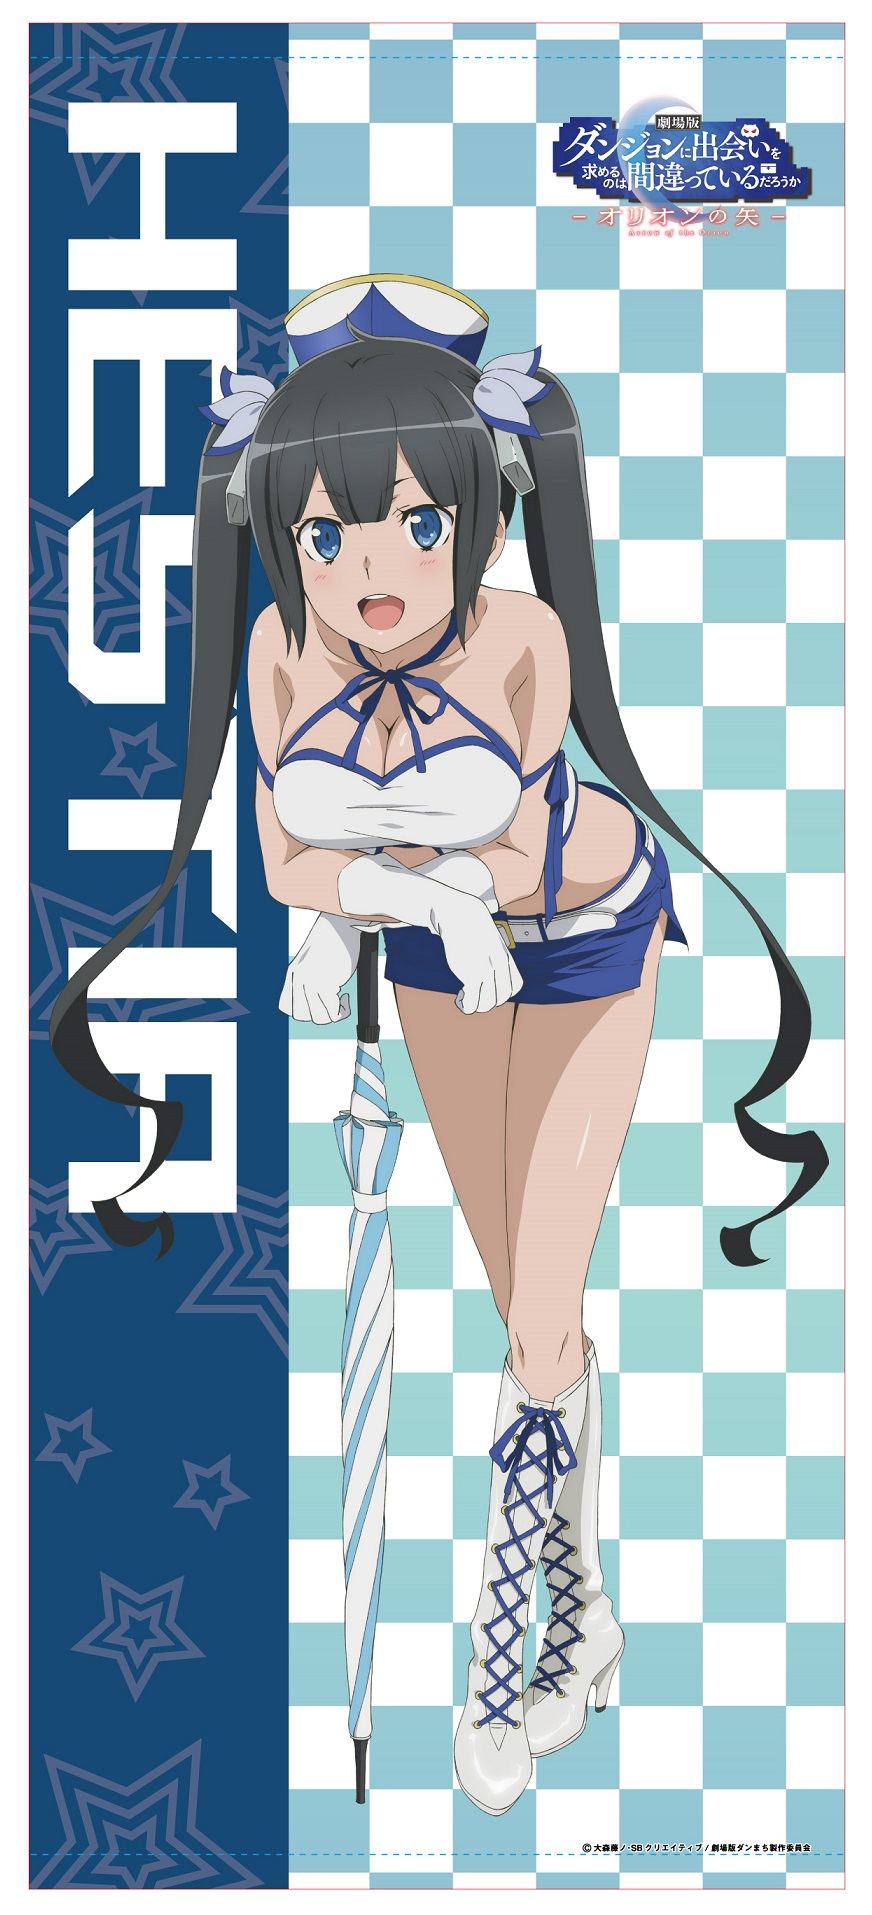 IS IT WRONG TO TRY TO PICK UP GIRLS IN A DUNGEON? ARROW OF THE ORION ORIGINAL ILLUSTRATION BIG WALL SCROLL: HESTIA Matsumoto Shoji